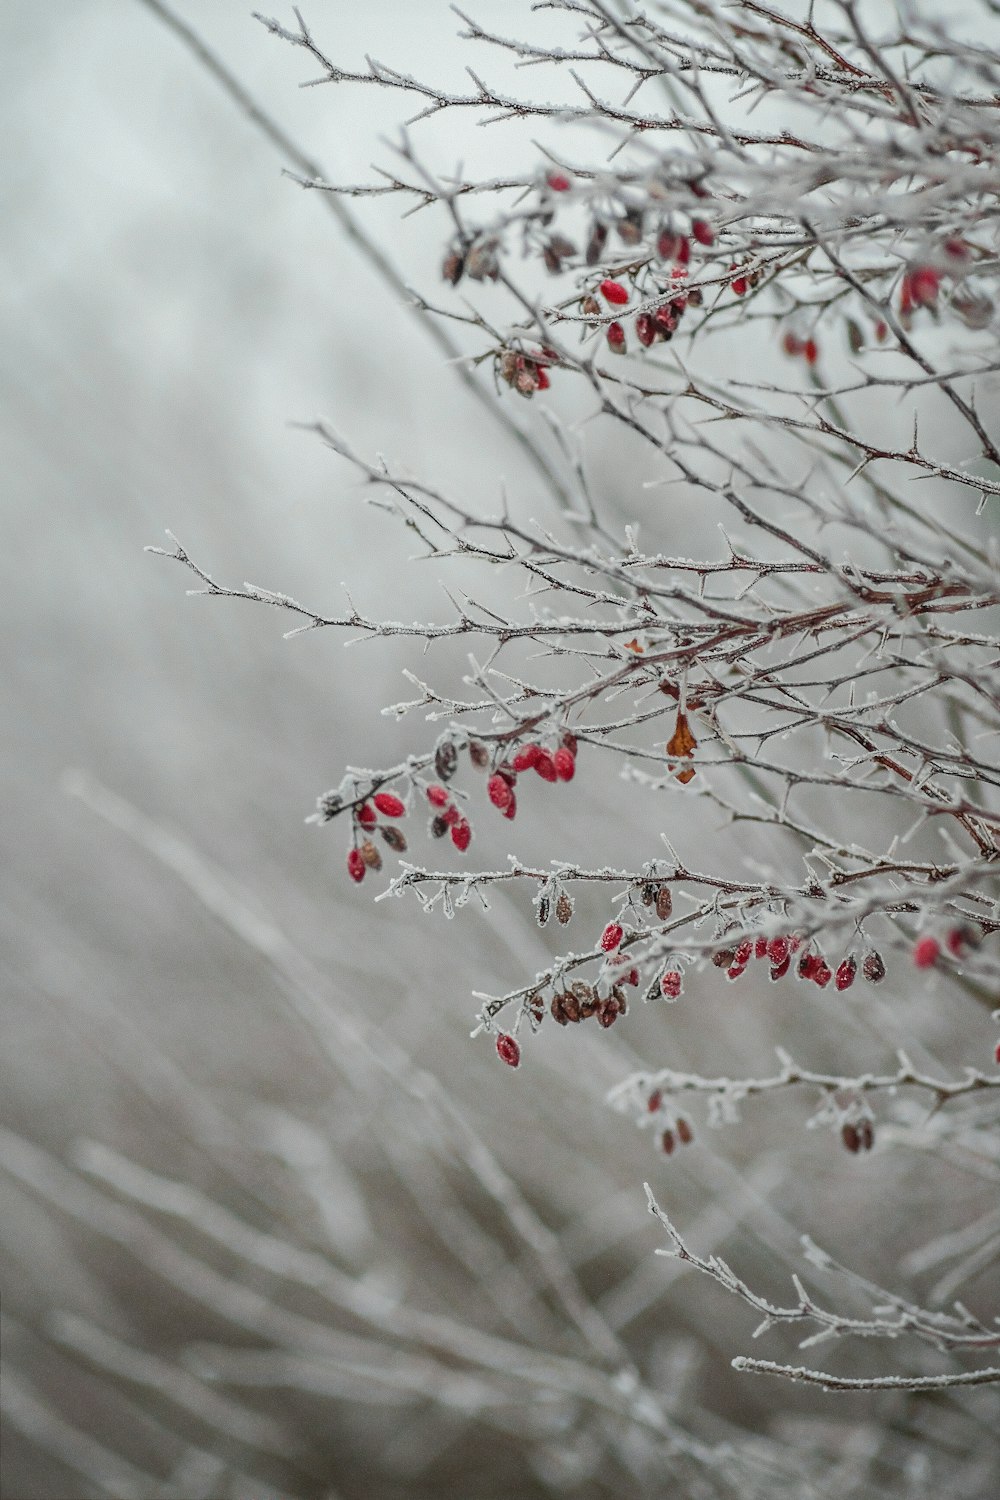 the branches of a tree are covered in ice and berries